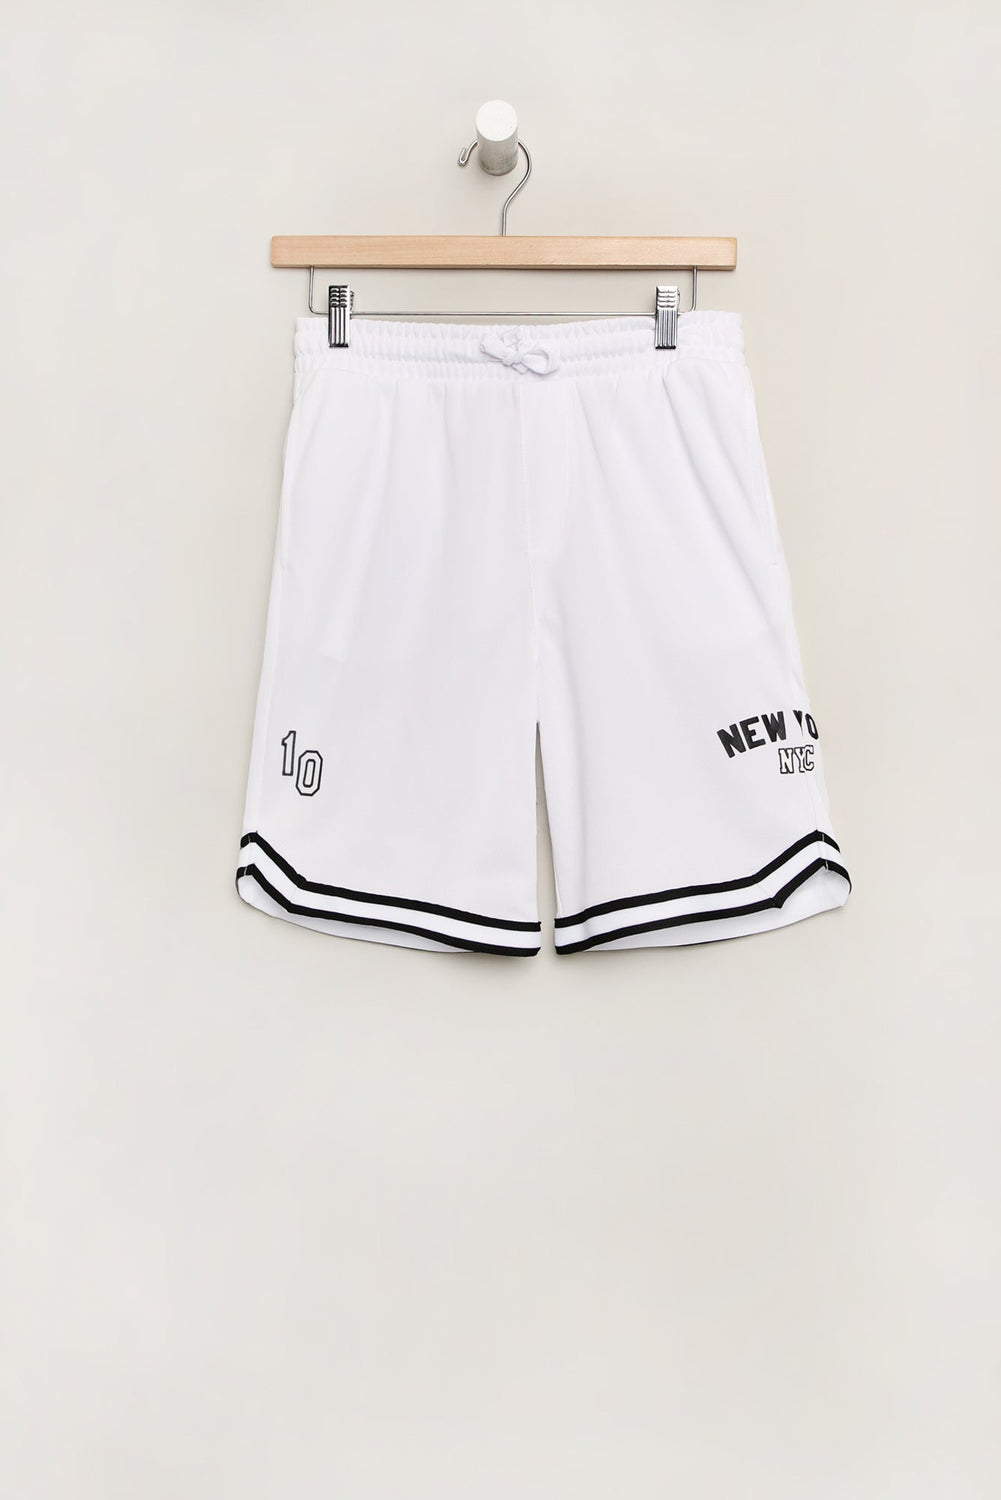 West49 Youth New York Mesh Shorts West49 Youth New York Mesh Shorts